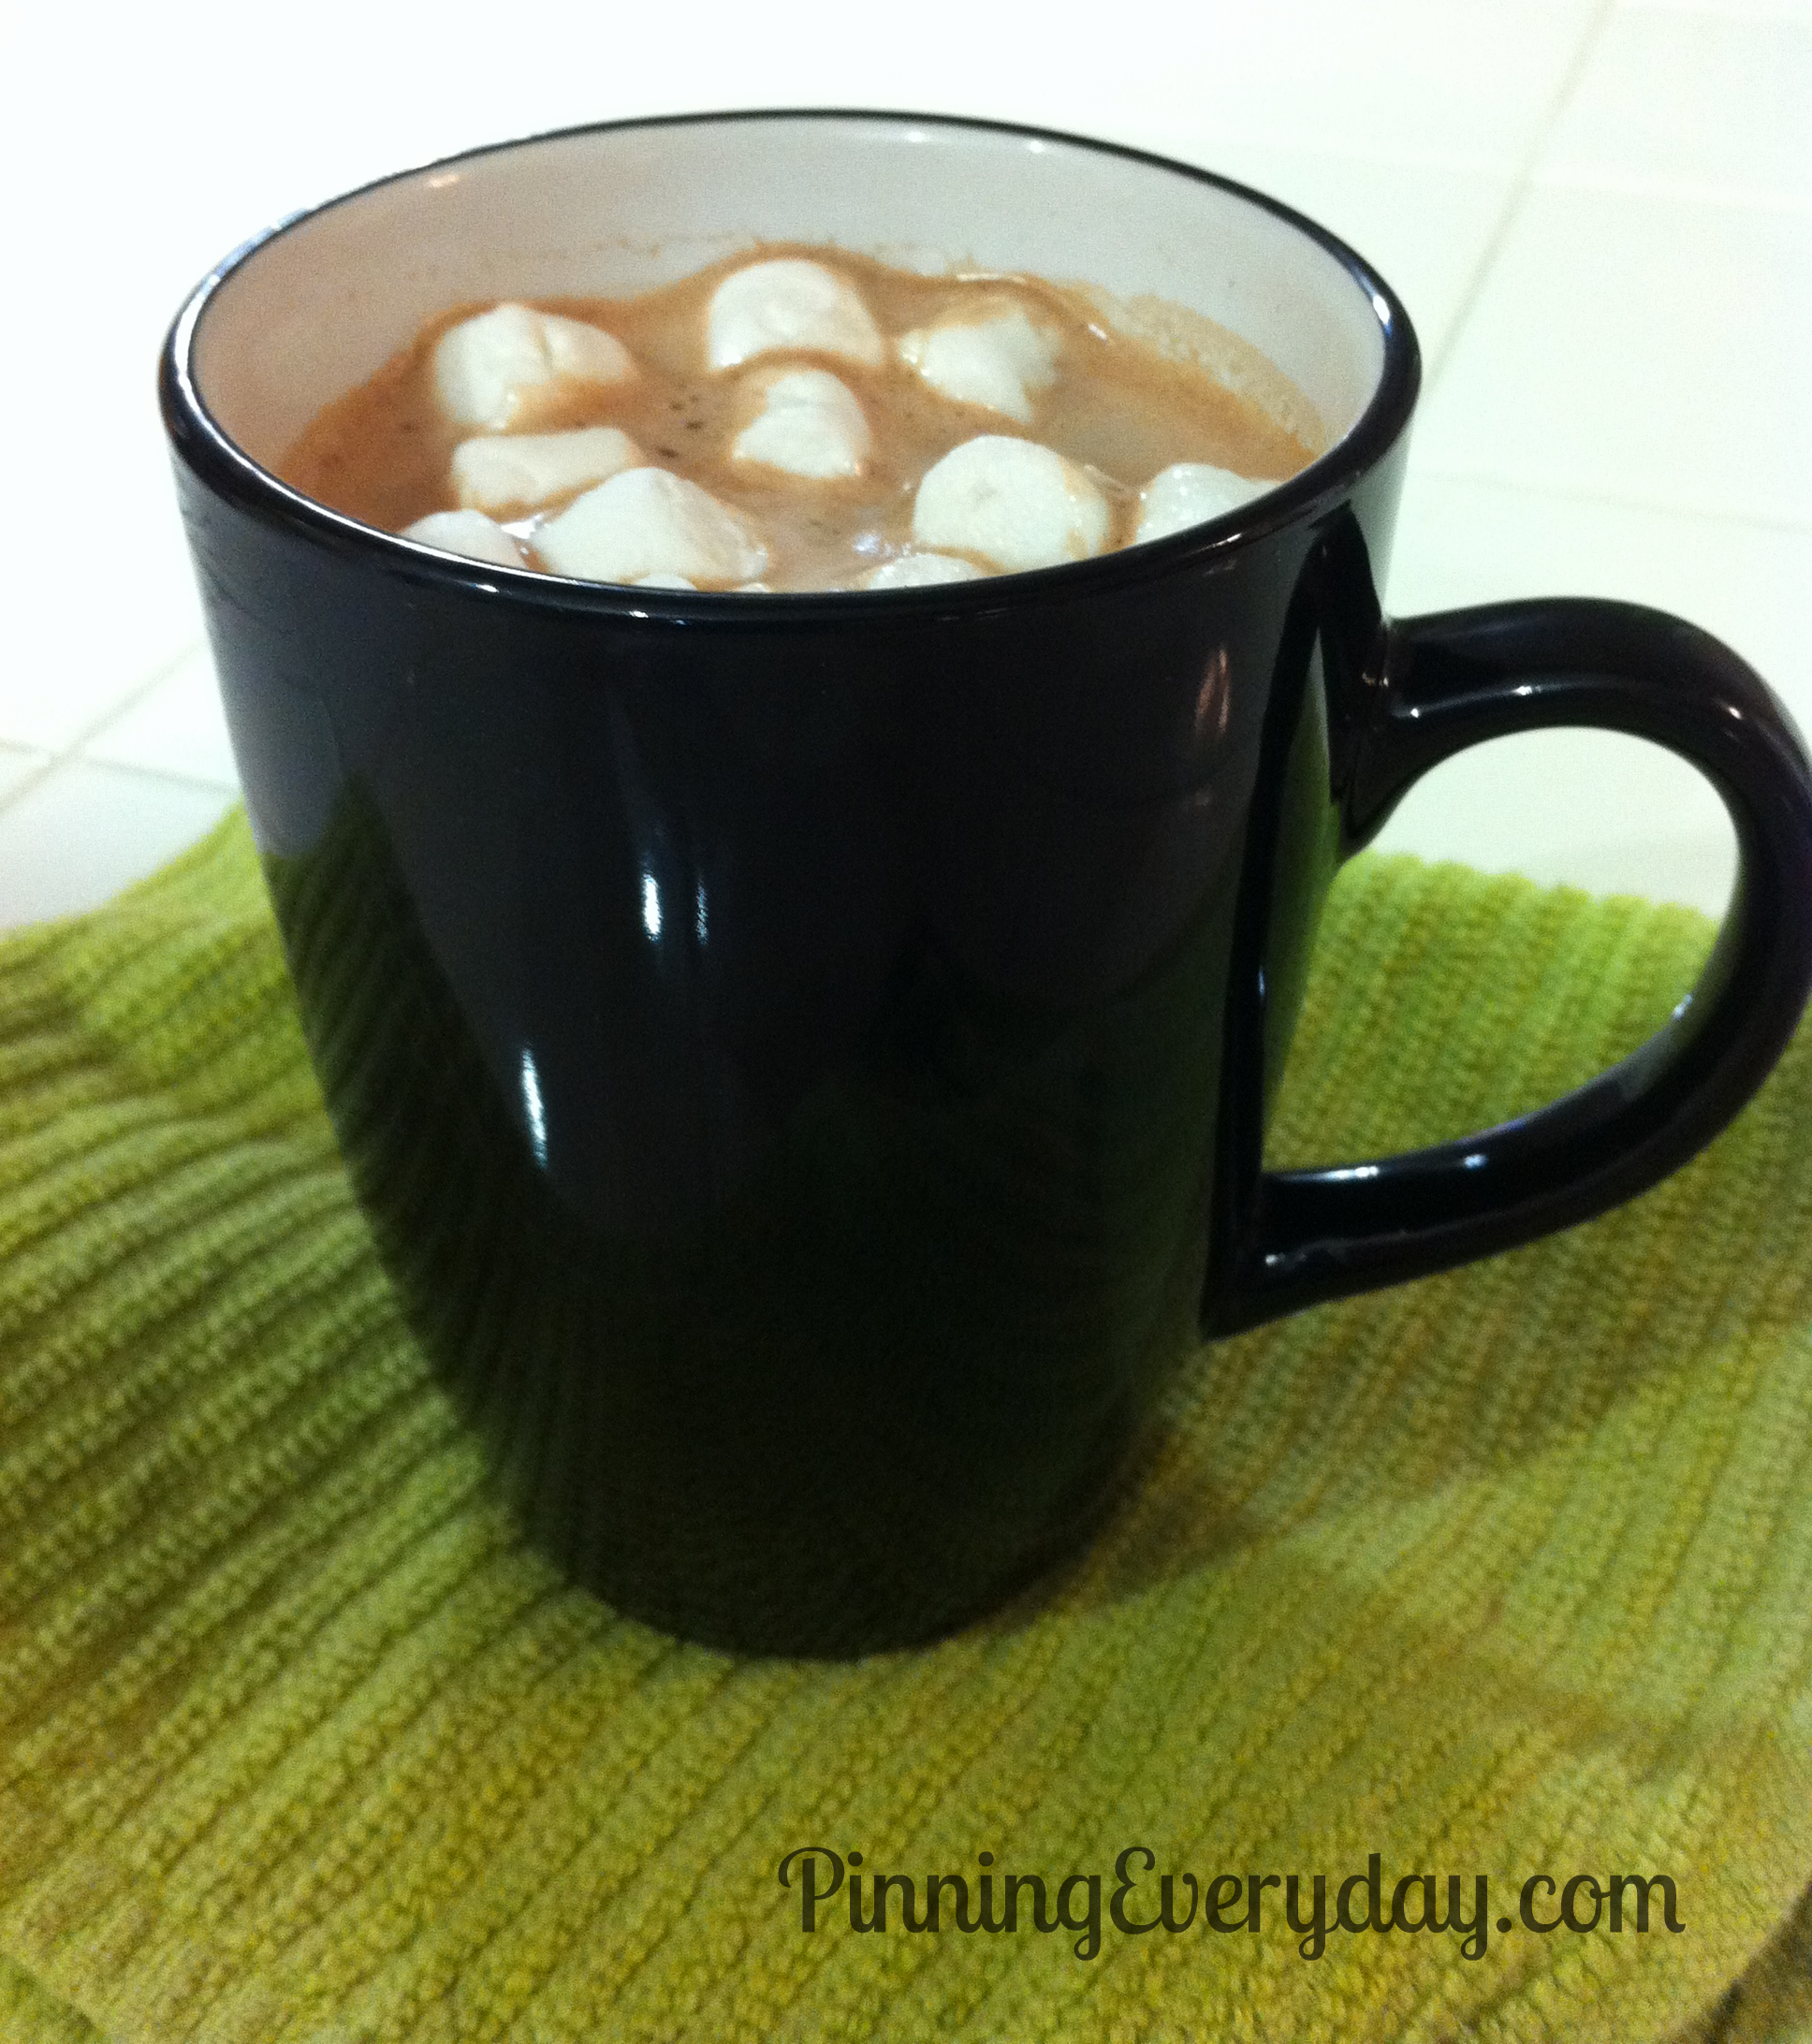 What is an easy hot chocolate recipe?